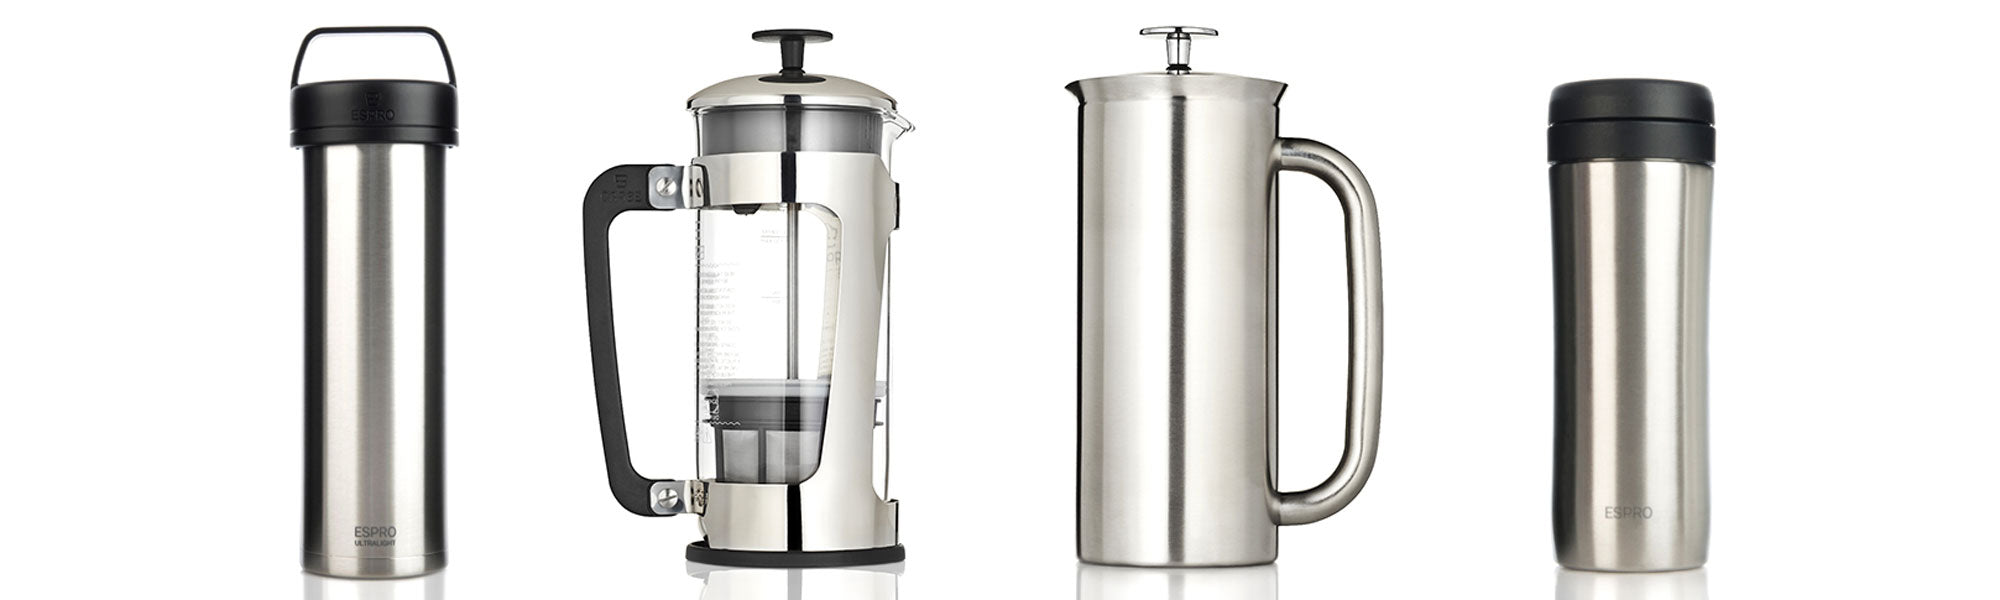 ESPRO P5 32-Oz. Glass and Polished Stainless Steel French Press + Reviews